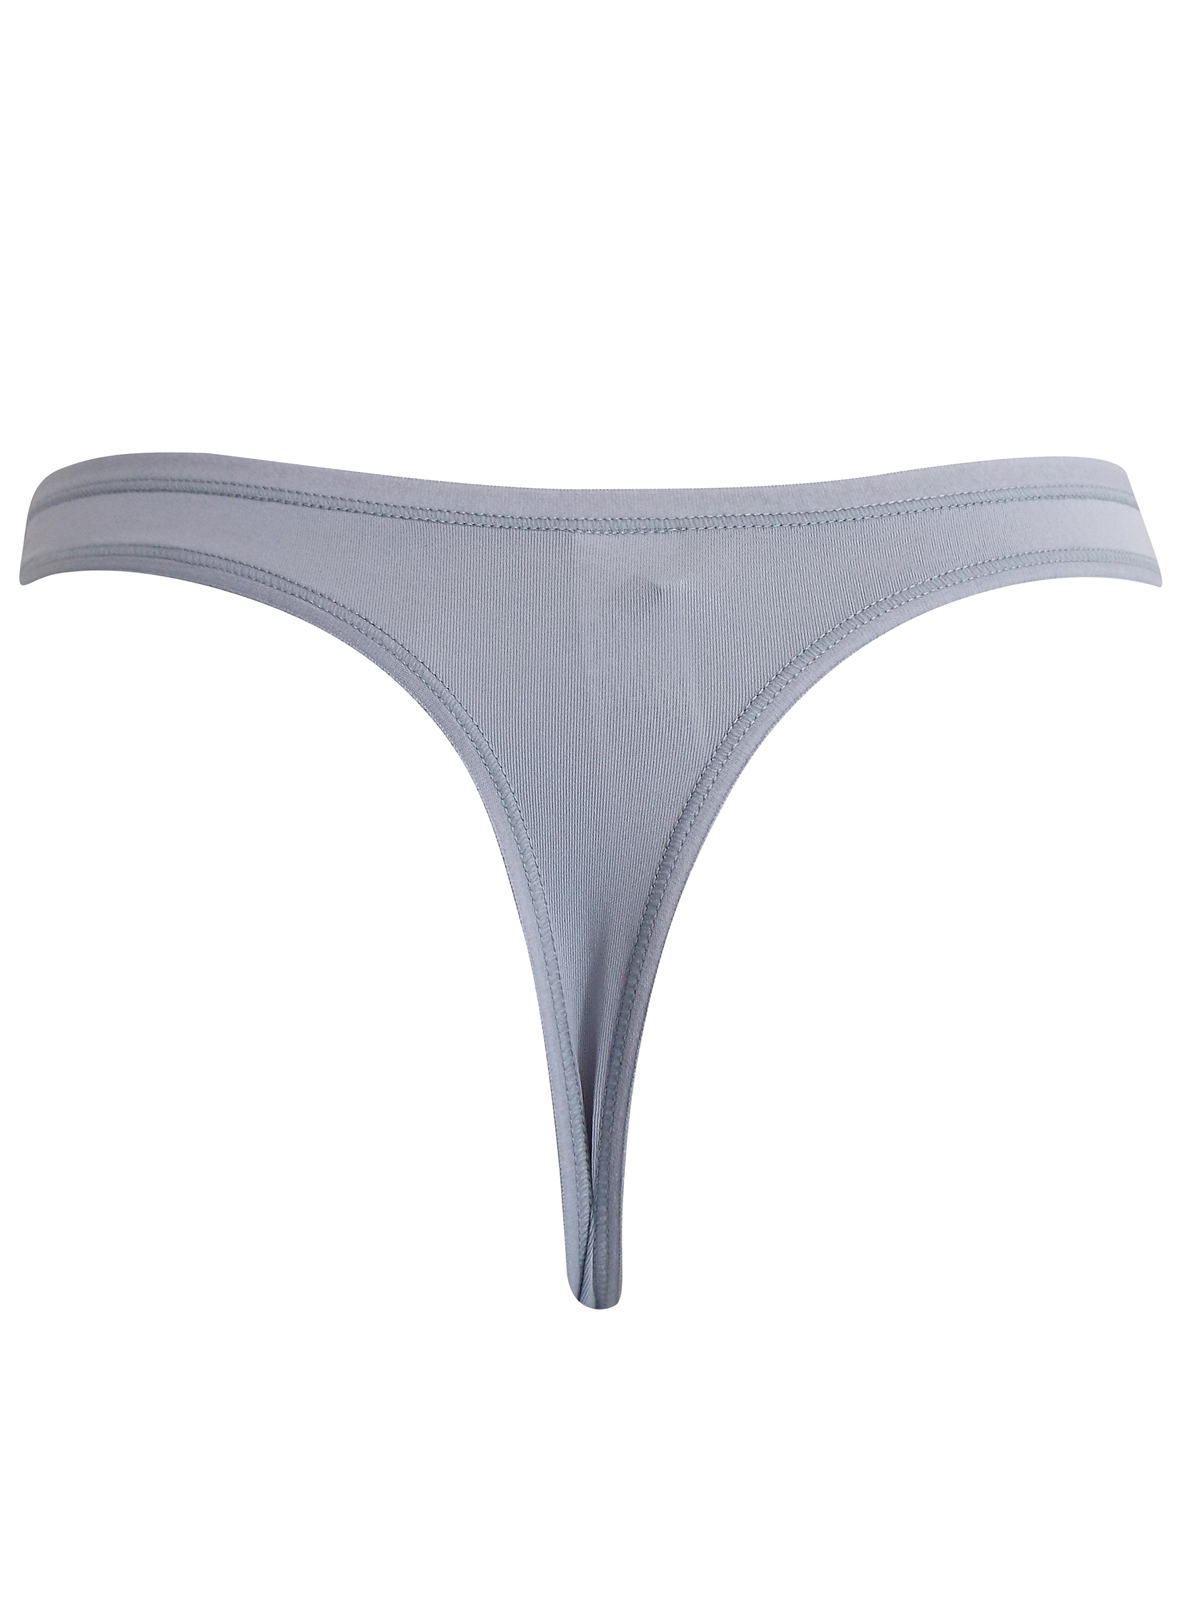 F&F - - F&F GREY 5-Pack Low Rise Thongs - Size 8 to 18